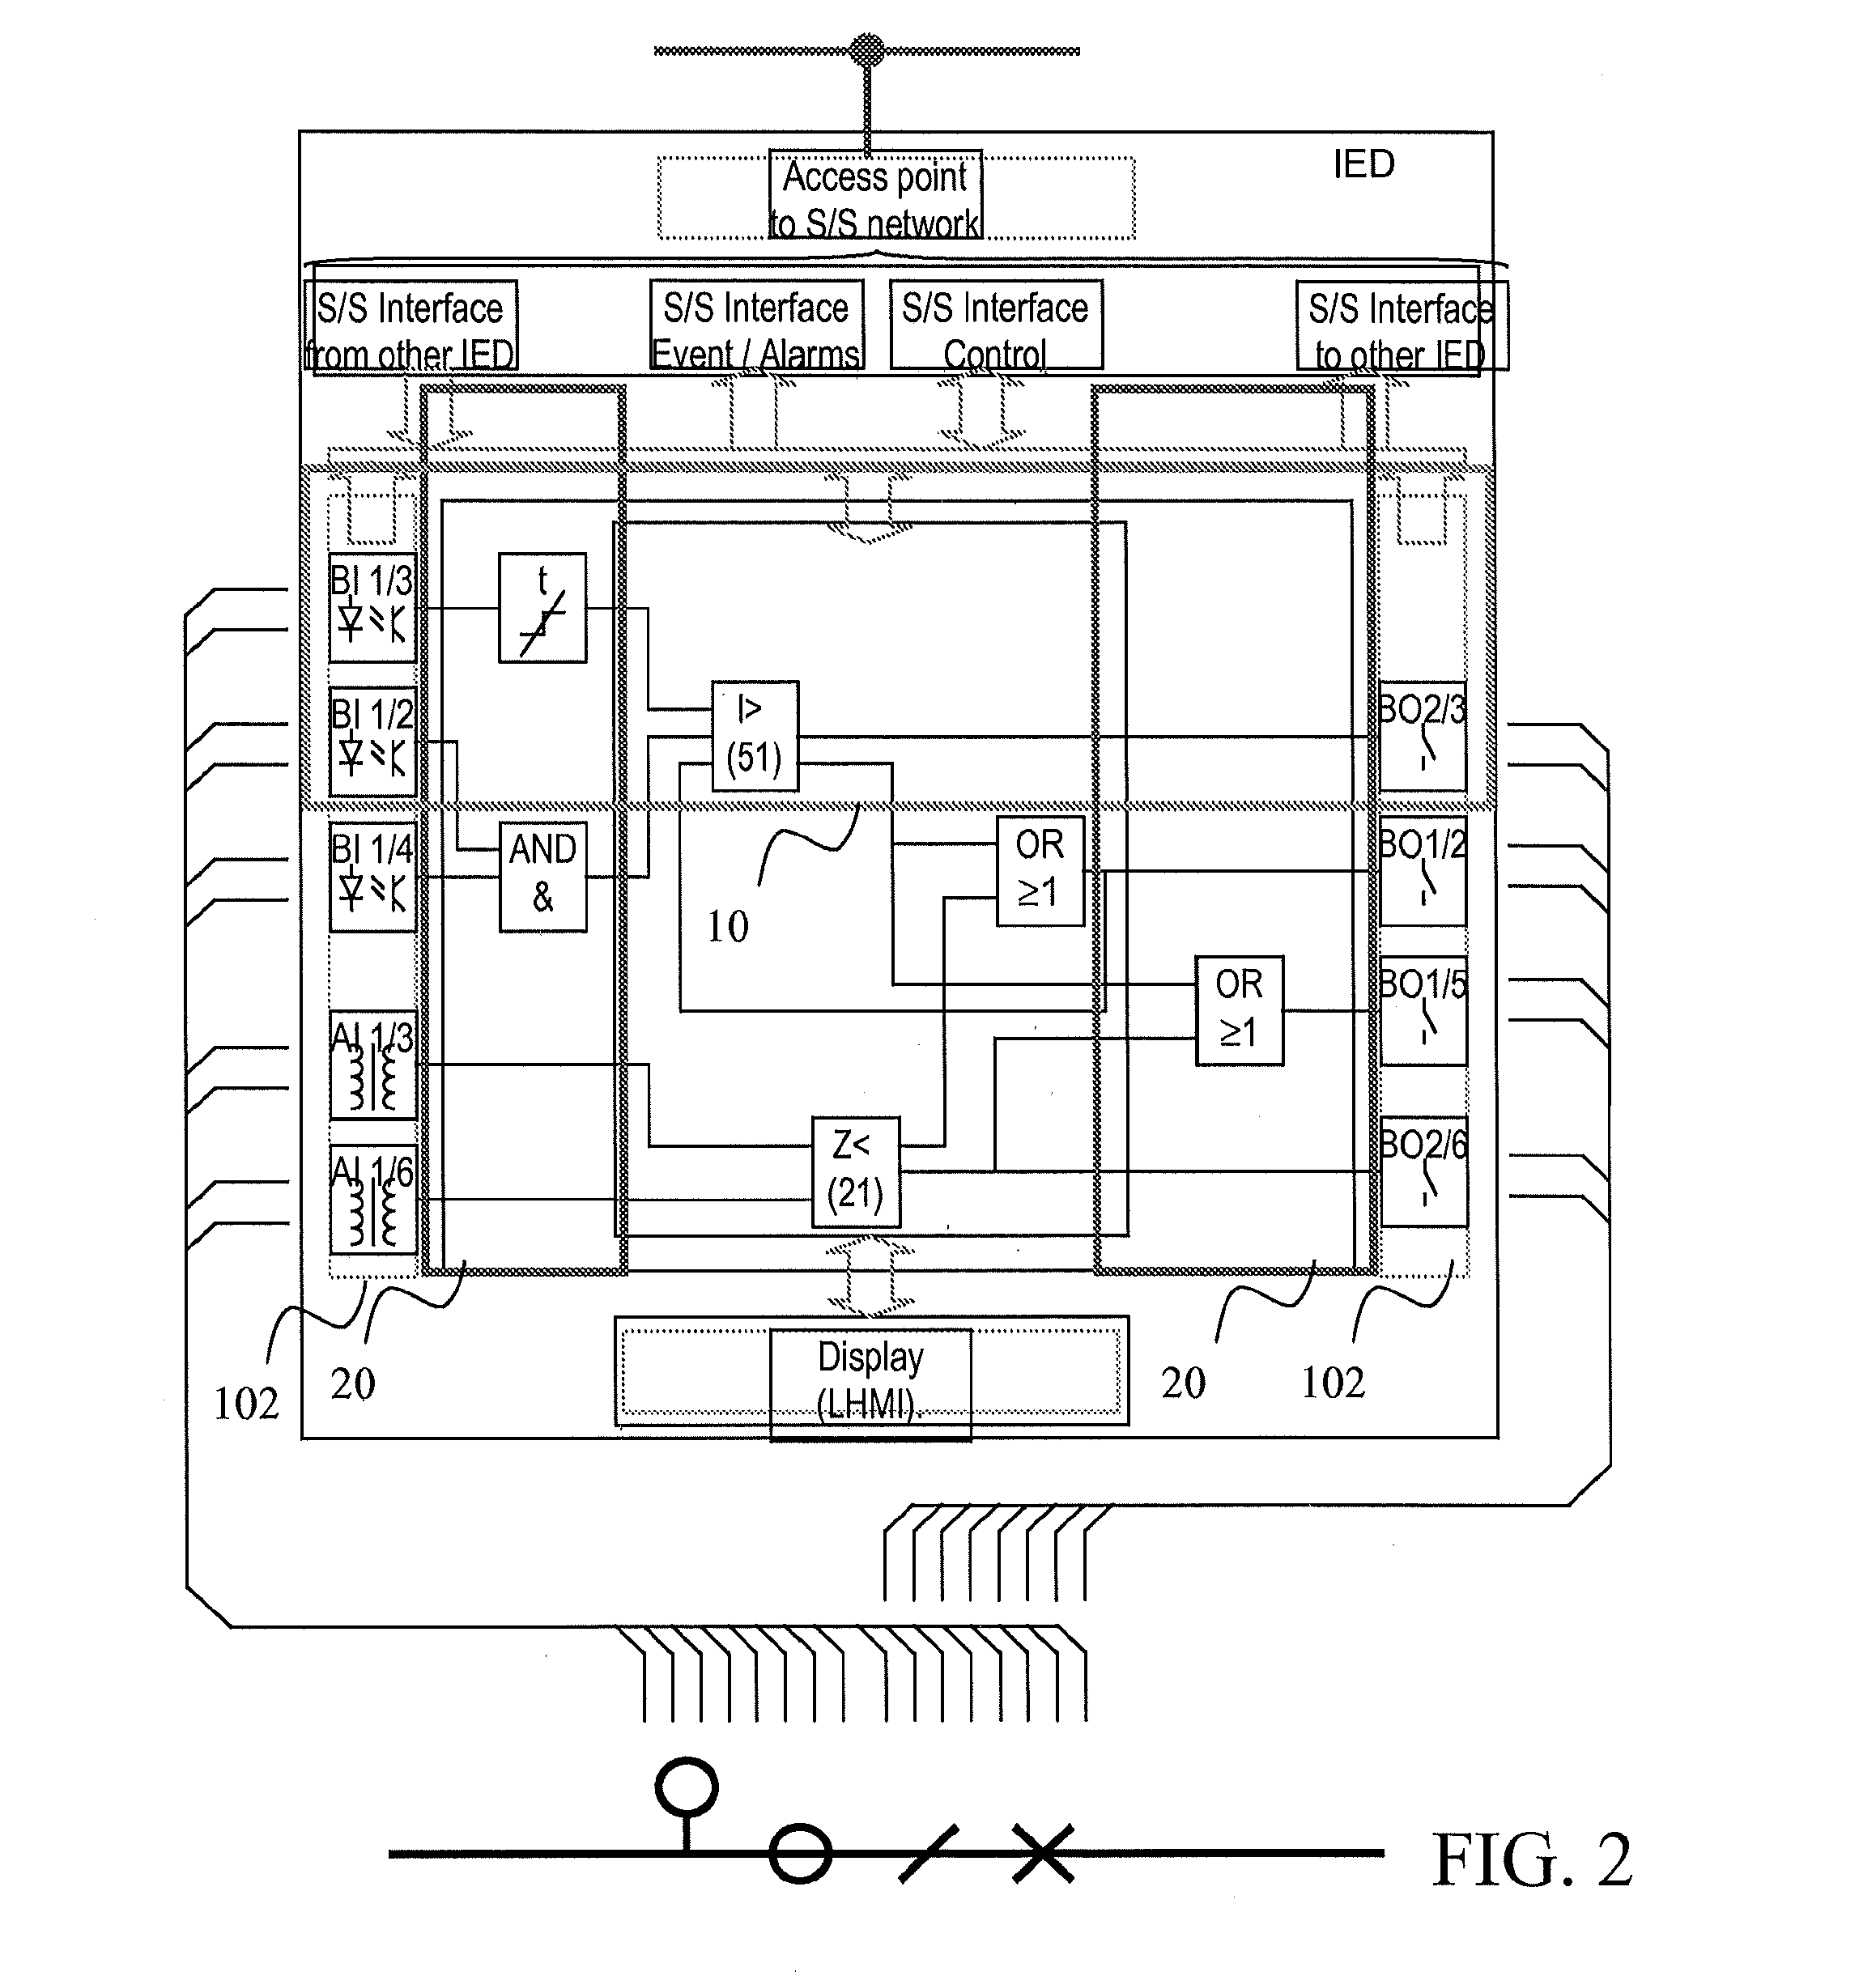 Configuration tool and system for an intelligent electronic device